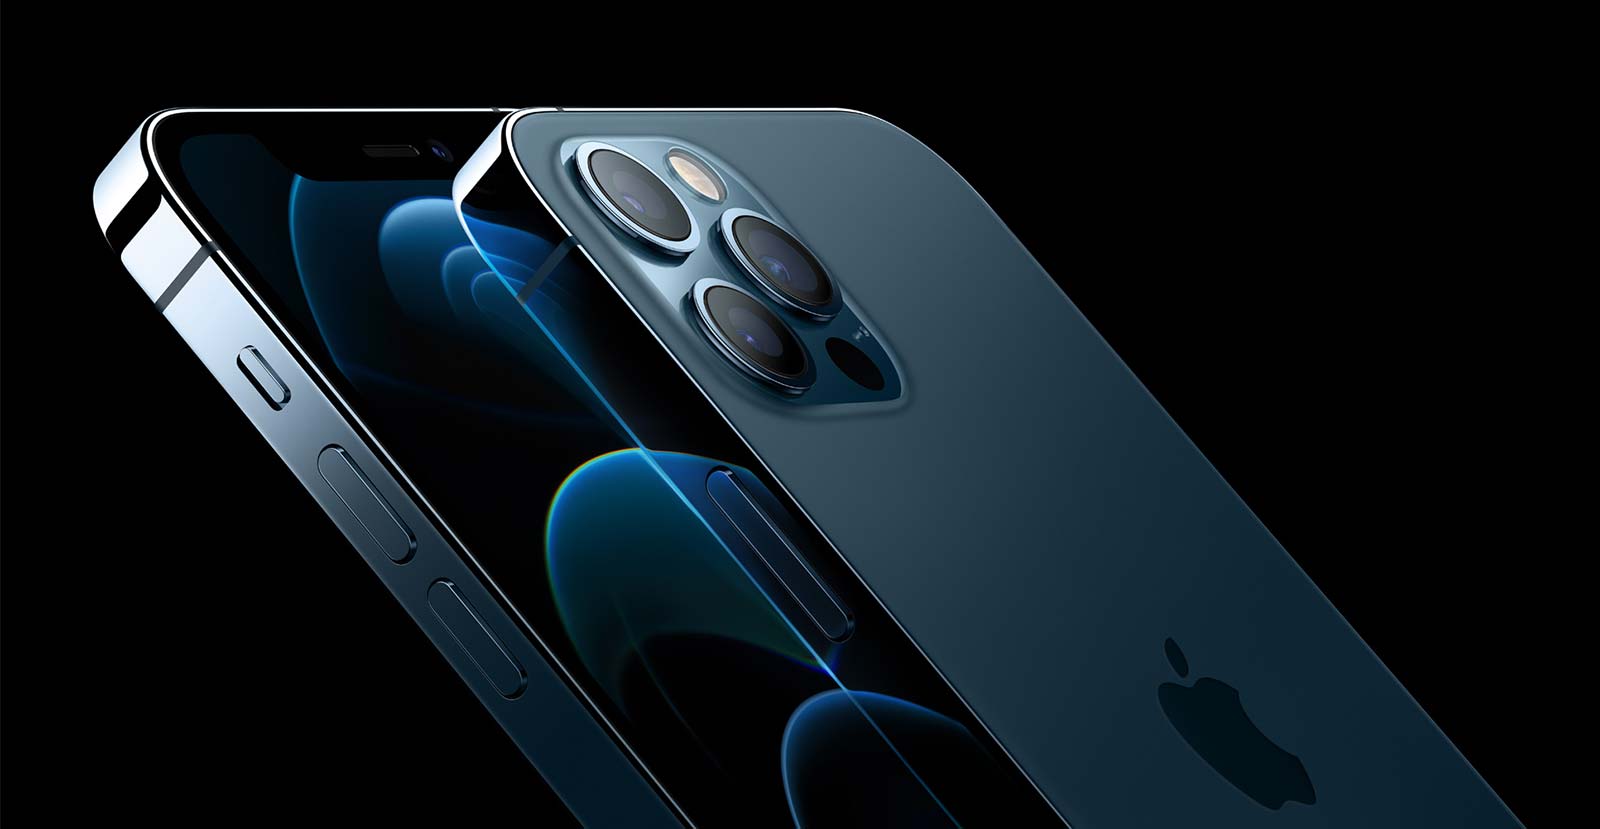 Apple iPhone 12 Pro, 12 Pro Max raise bar with 5G, new cameras – Pickr